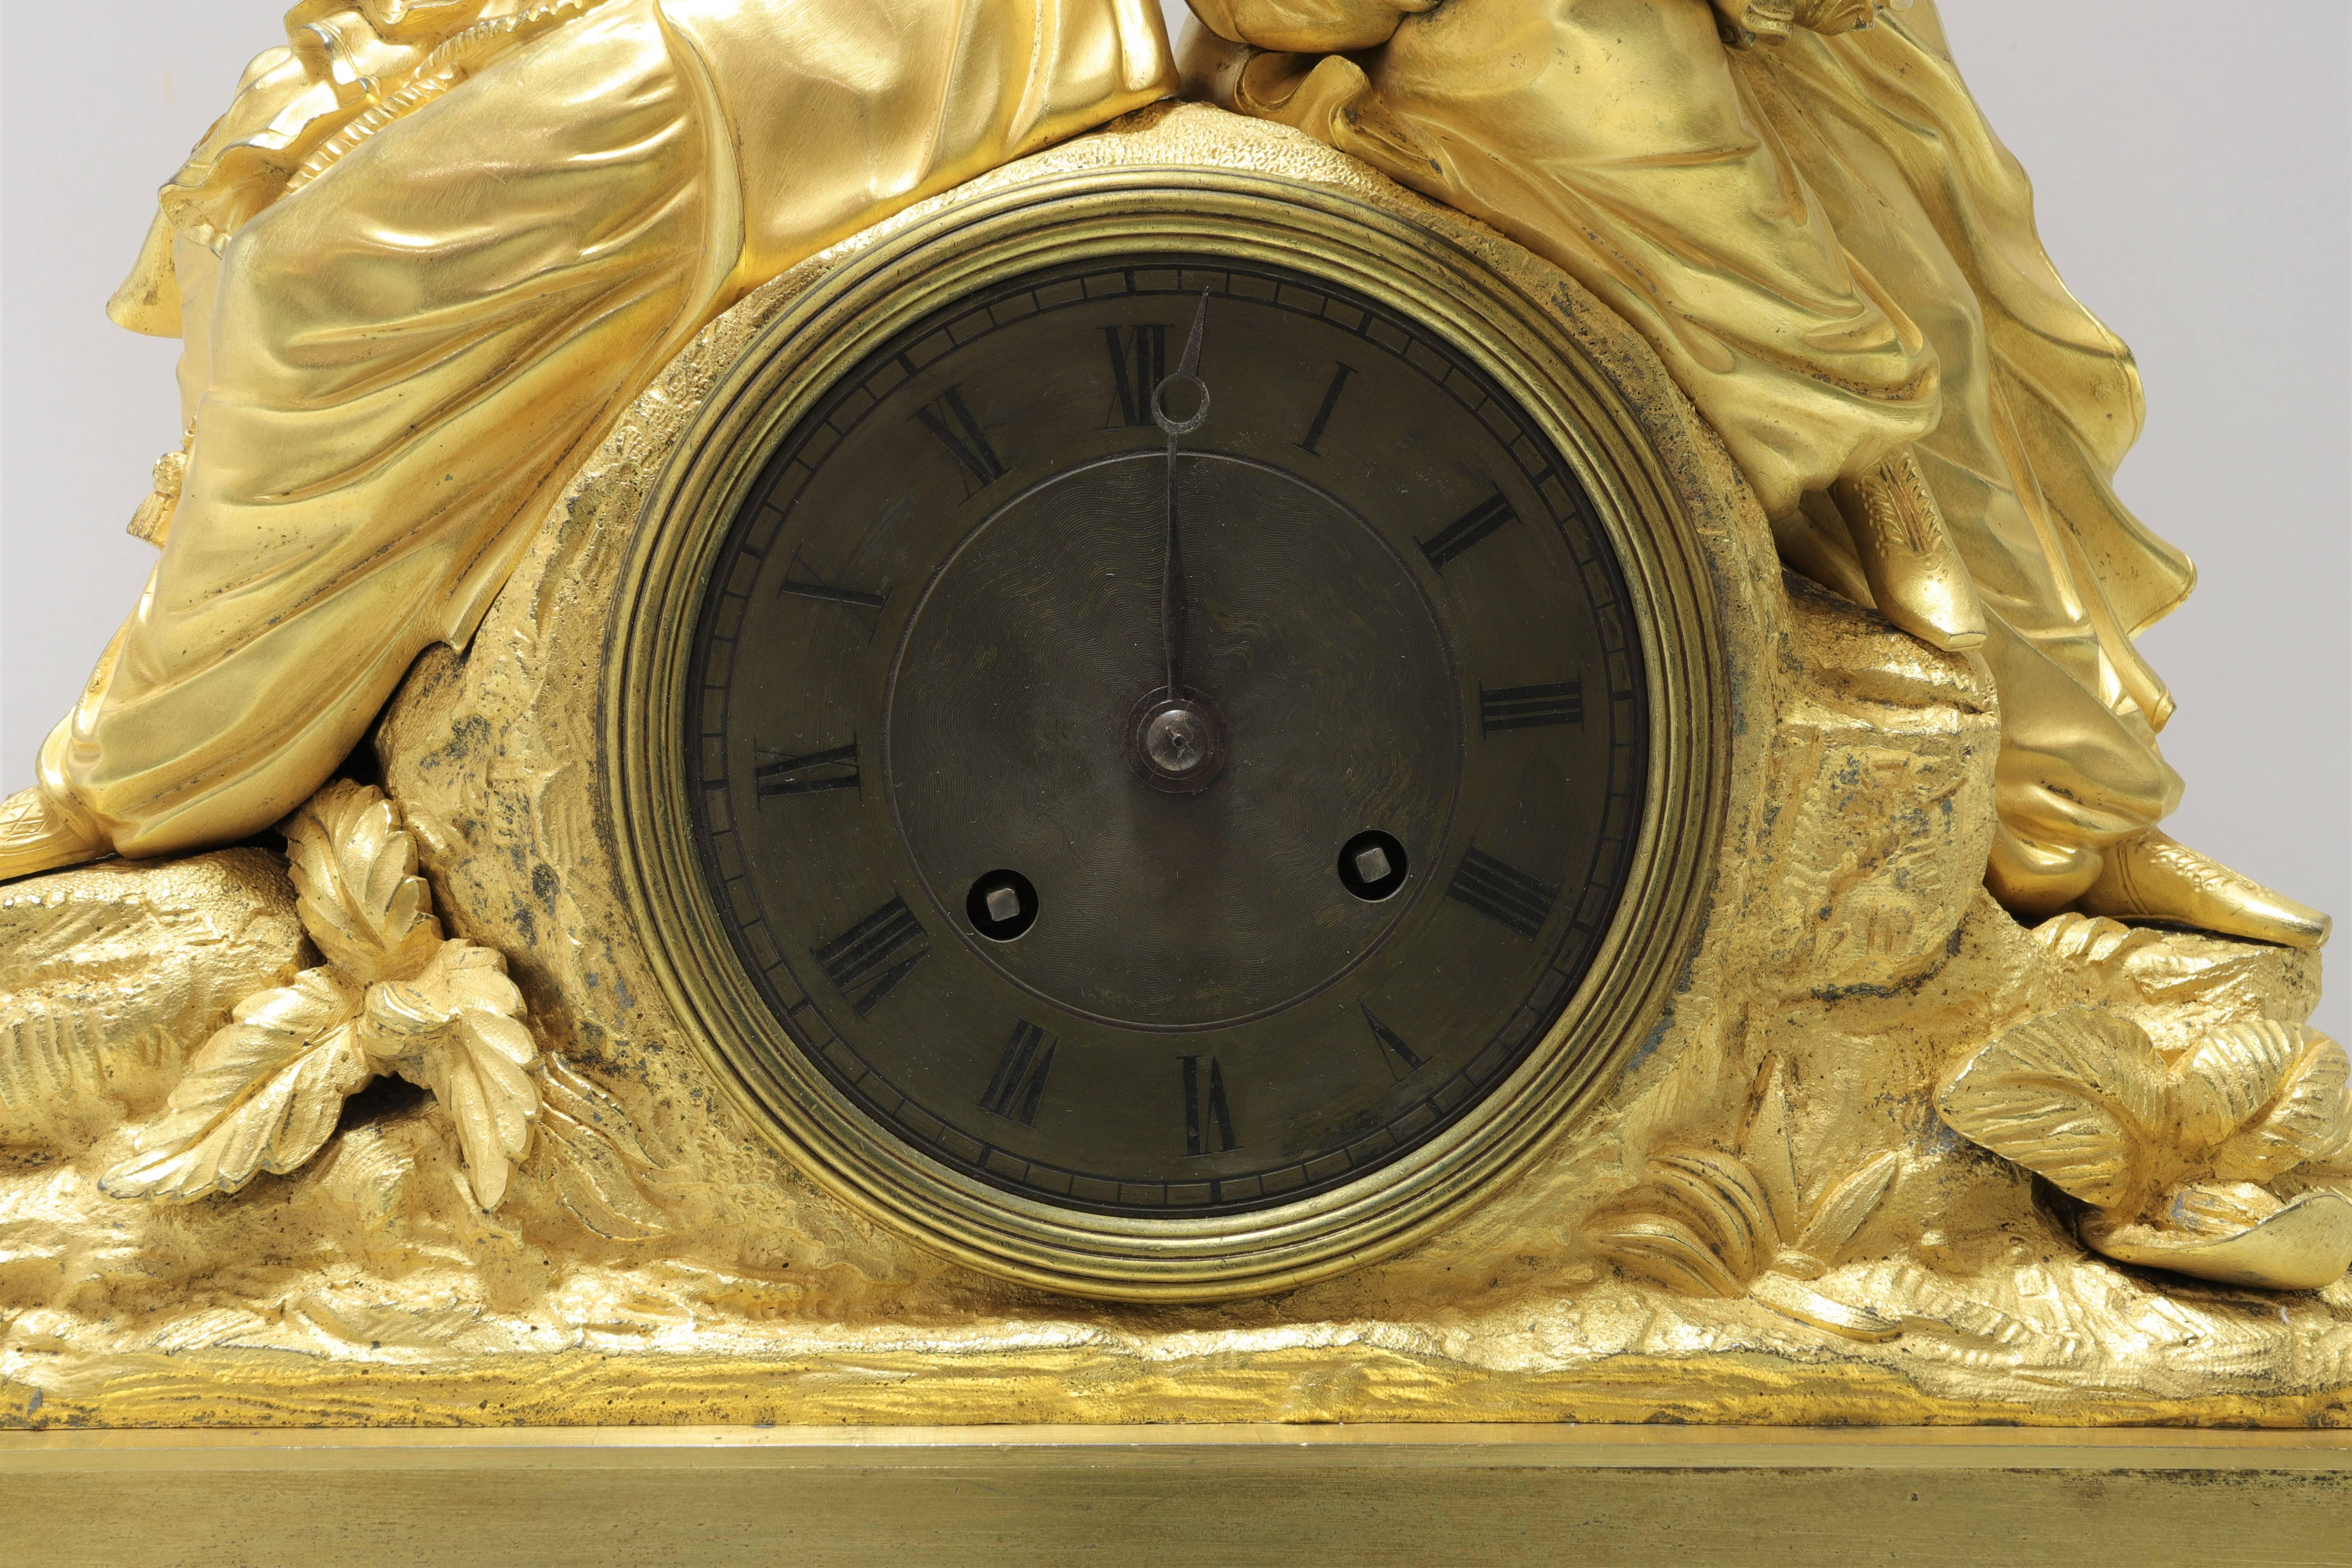 Fine quality French early 19th century Empire gilt bronze clock made for the Turkish or Greek market.